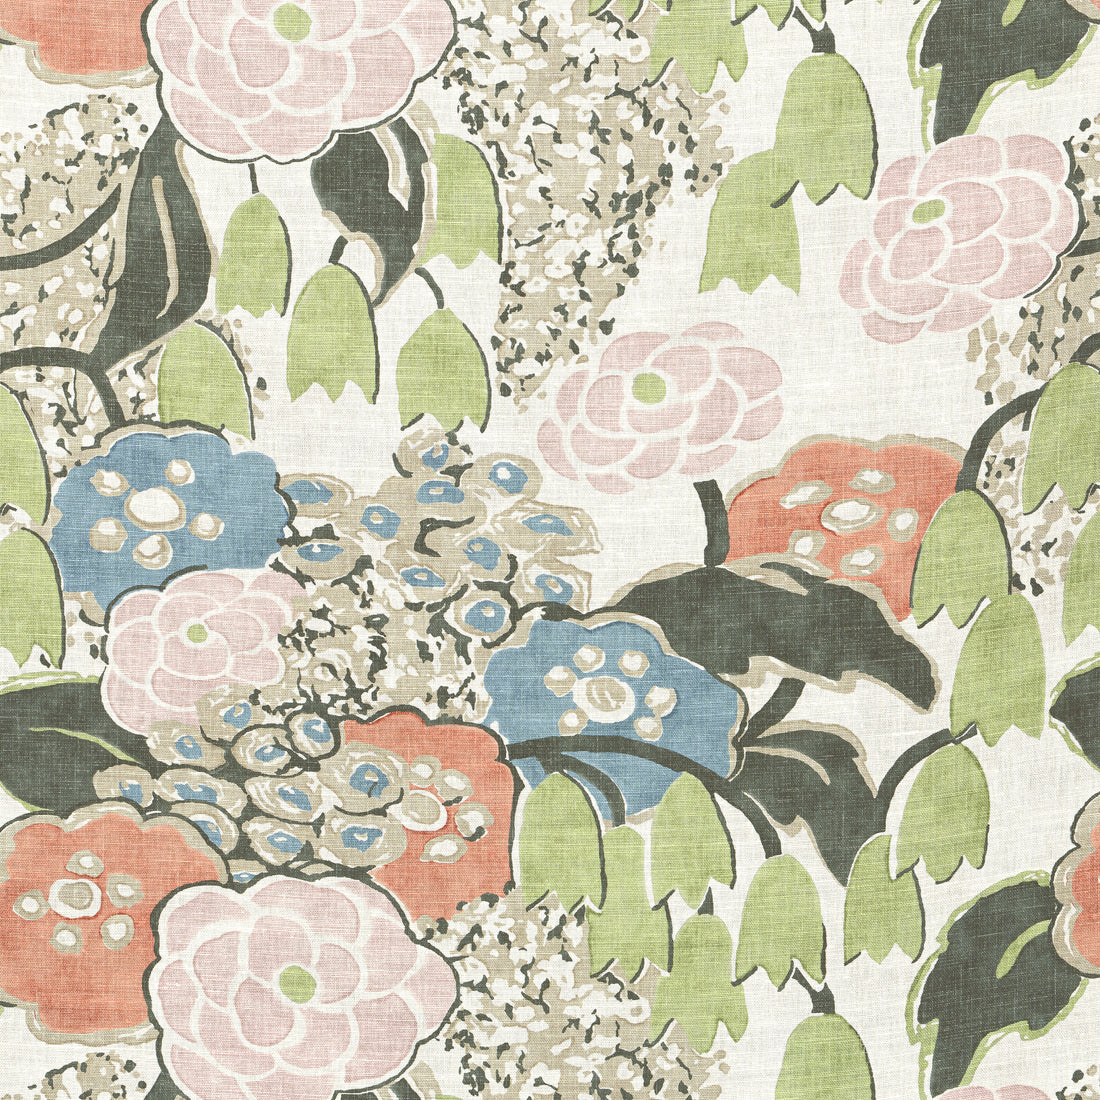 Laura fabric in blush and green color - pattern number AF23100 - by Anna French in the Willow Tree collection